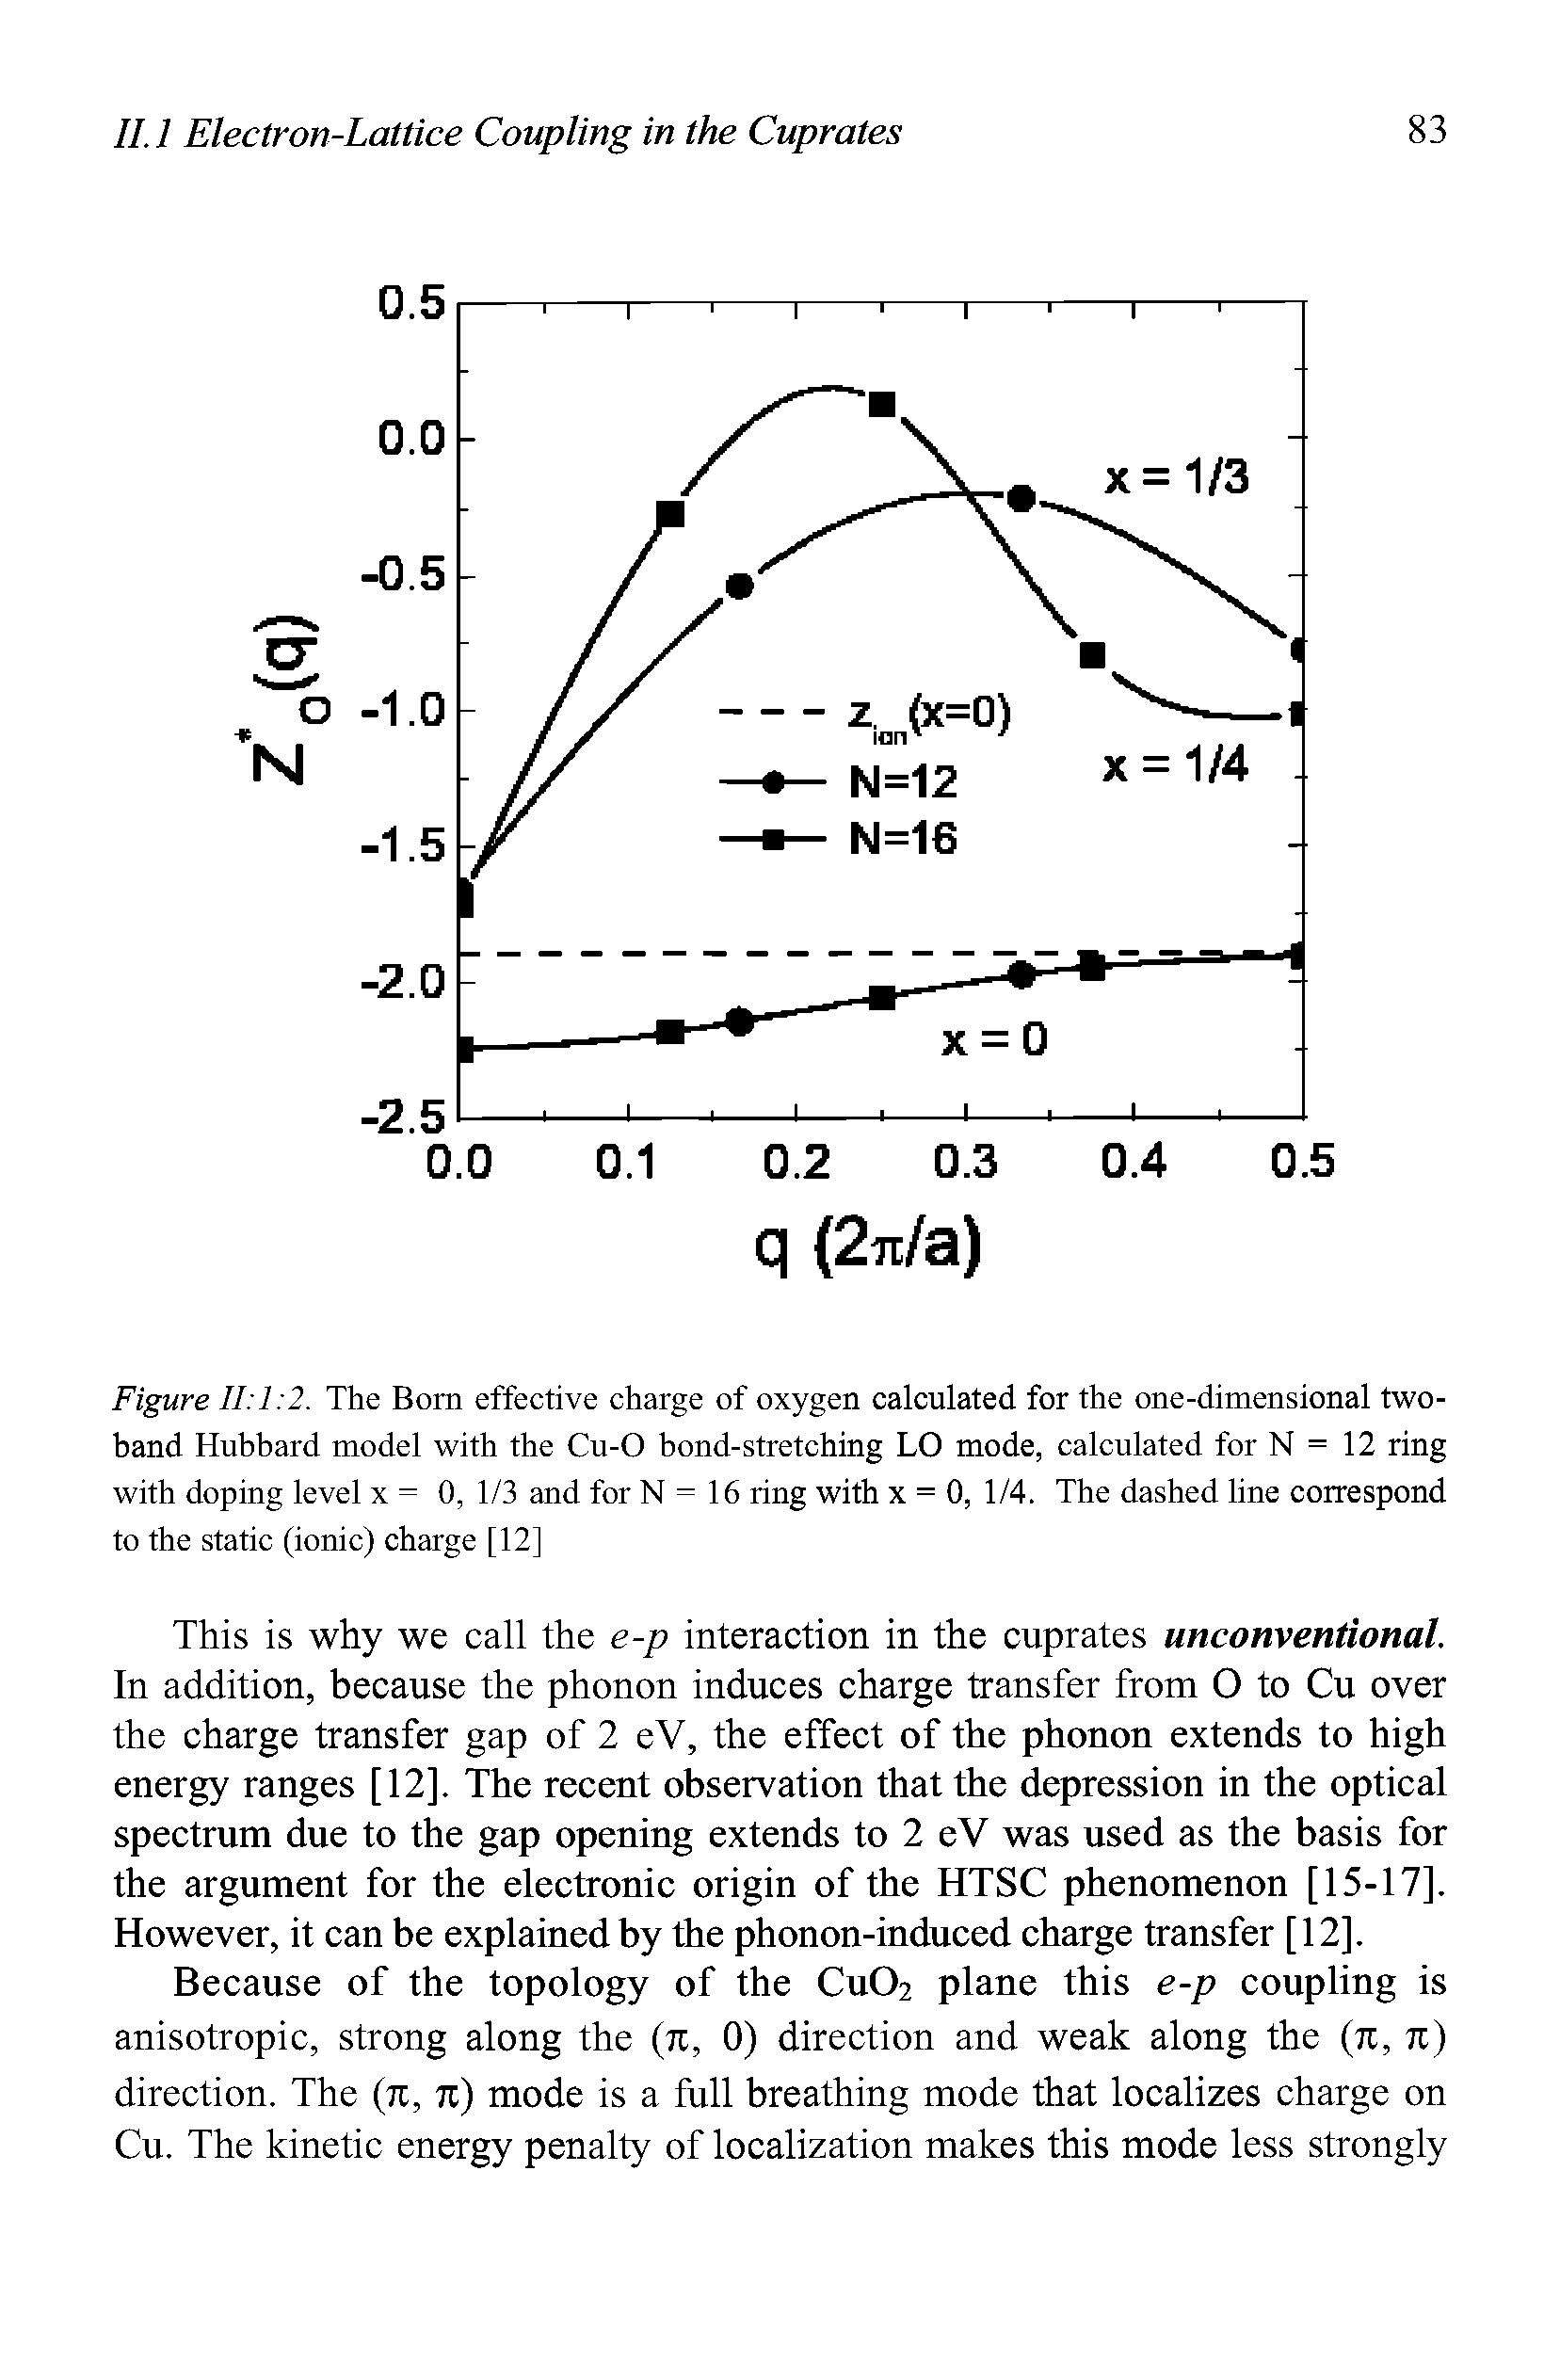 Figure 11 1 2. The Bom effective charge of oxygen calculated for the one-dimensional two-band Hubbard model with the Cu-0 bond-stretching LO mode, calculated for N = 12 ring with doping level x = 0, 1/3 and for N = 16 ring with x = 0, 1/4. The dashed line correspond to the static (ionic) charge [12]...